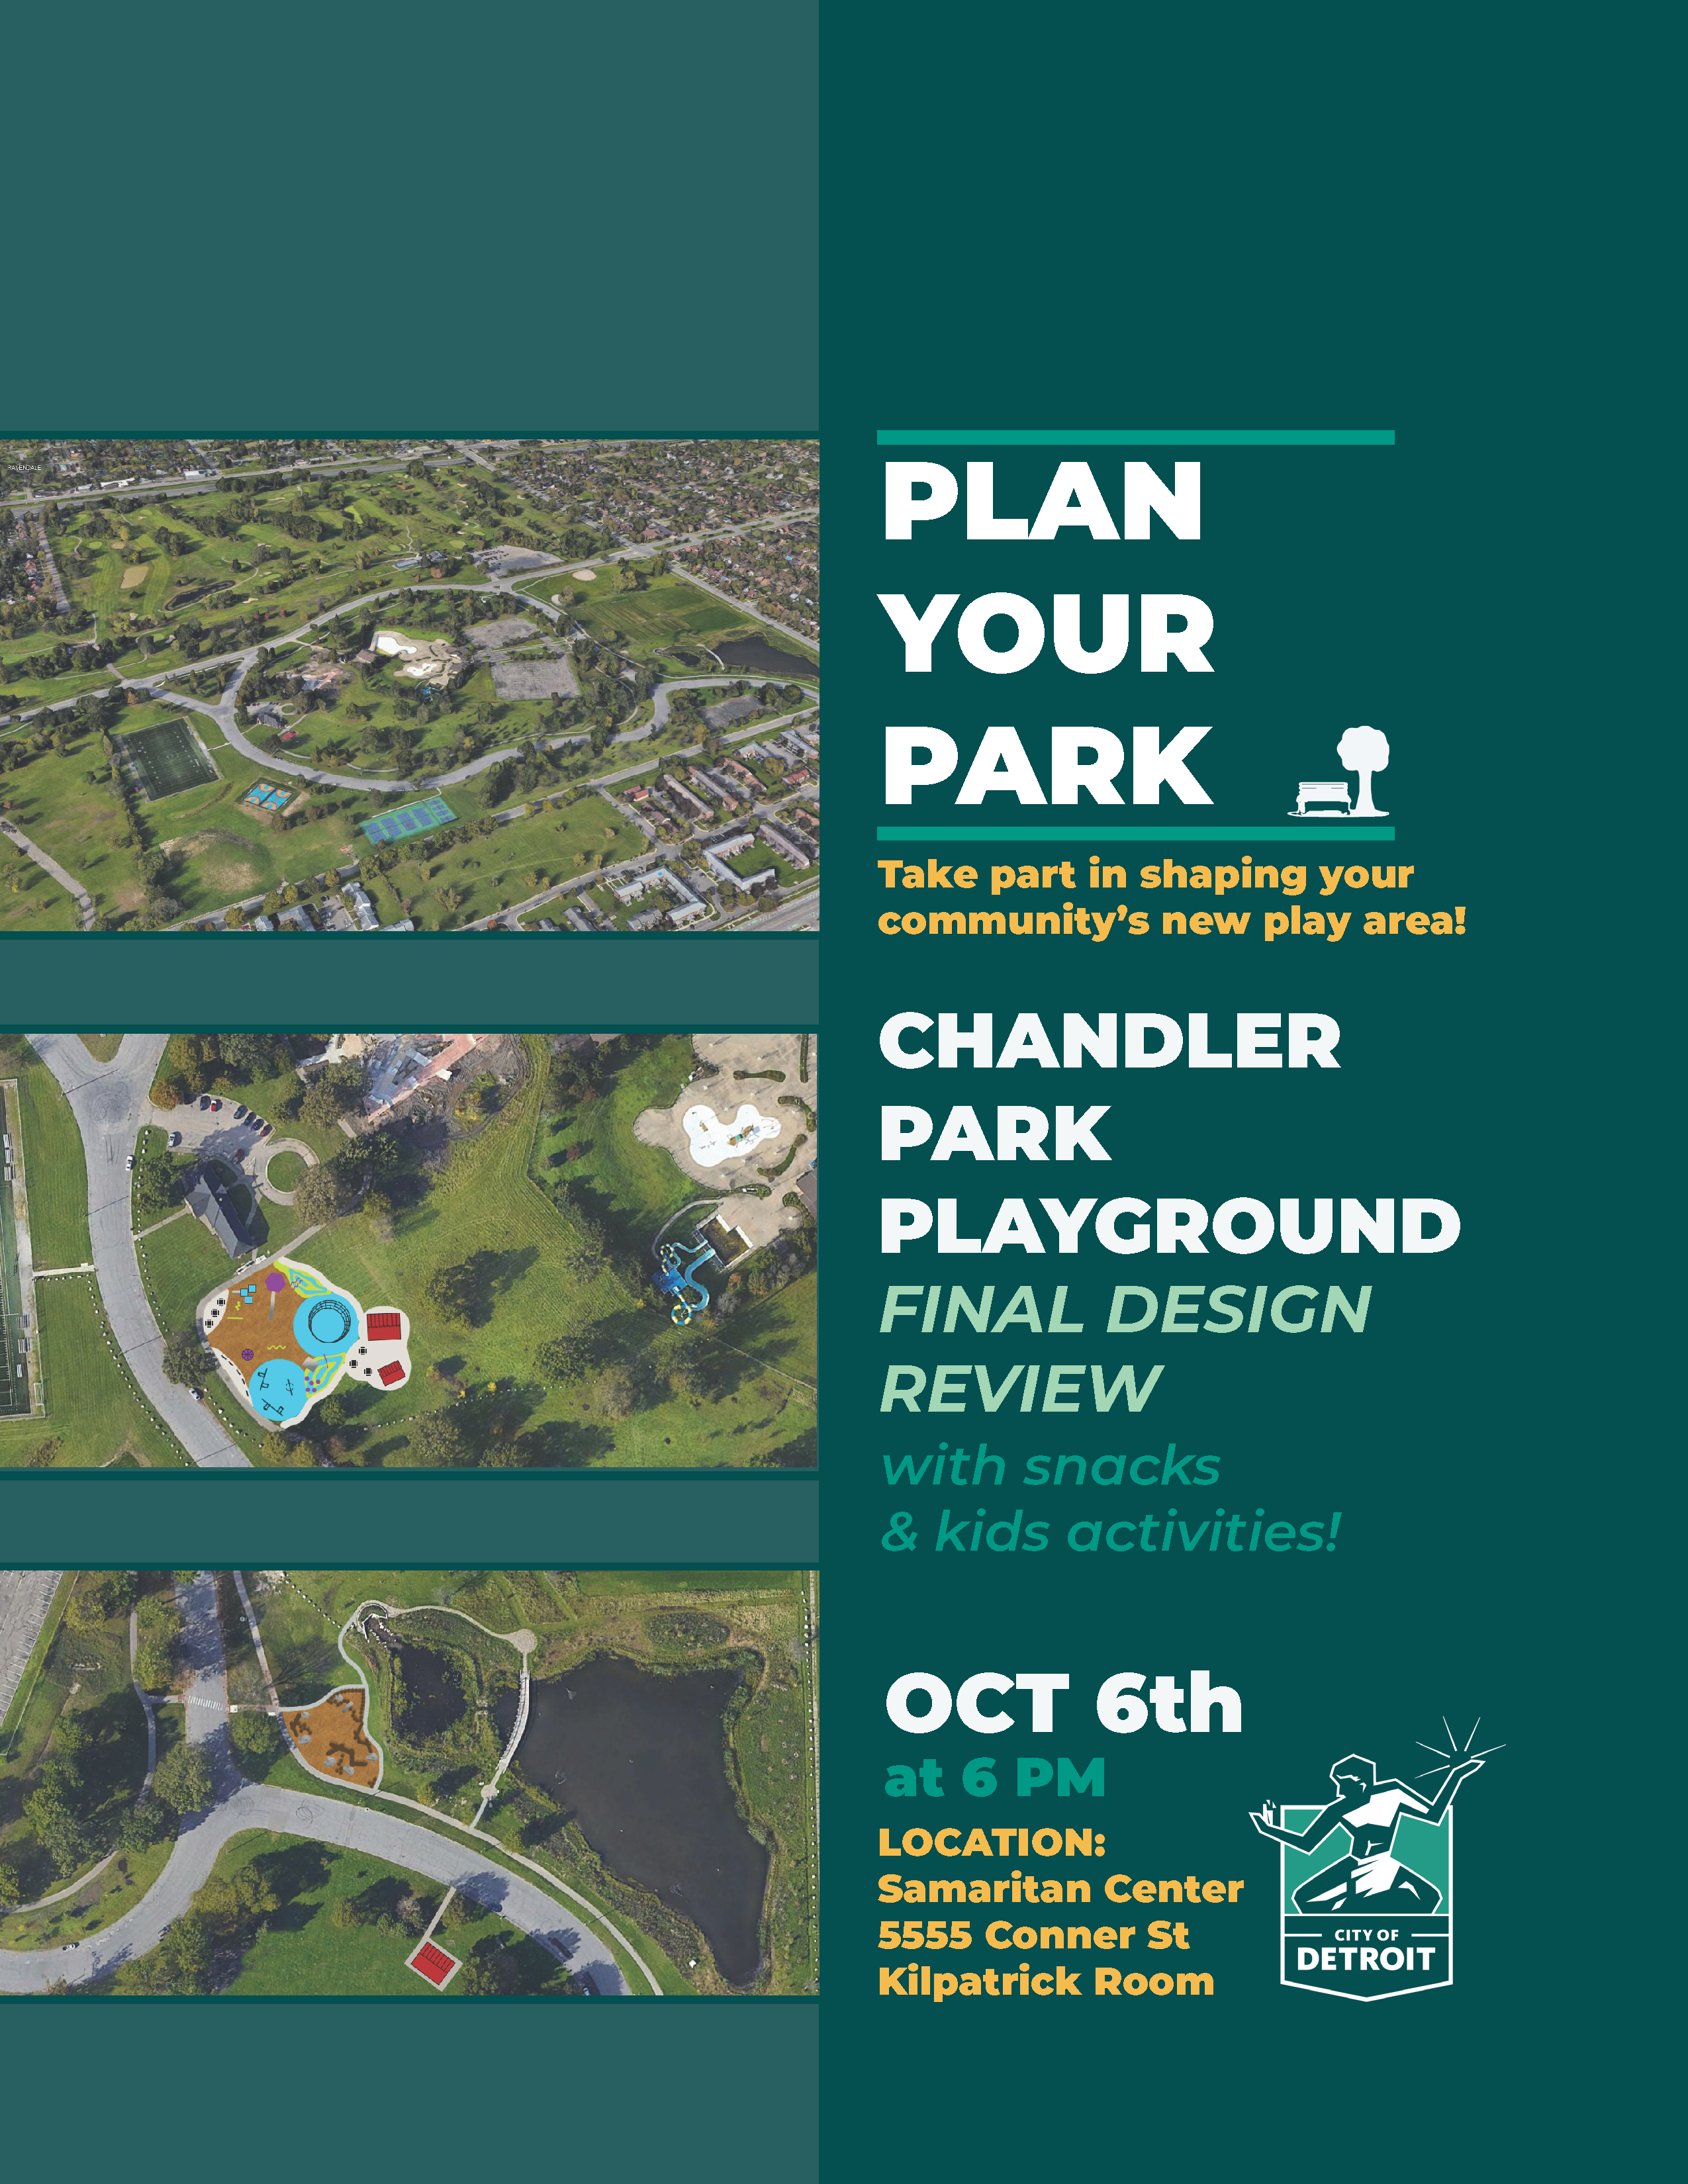 PLAN YOUR PARK: Chandler Park Community Meeting #3. Final Design Review. Oct 6th at 6pm. Location: The Samaritan Center 5555 Conner St